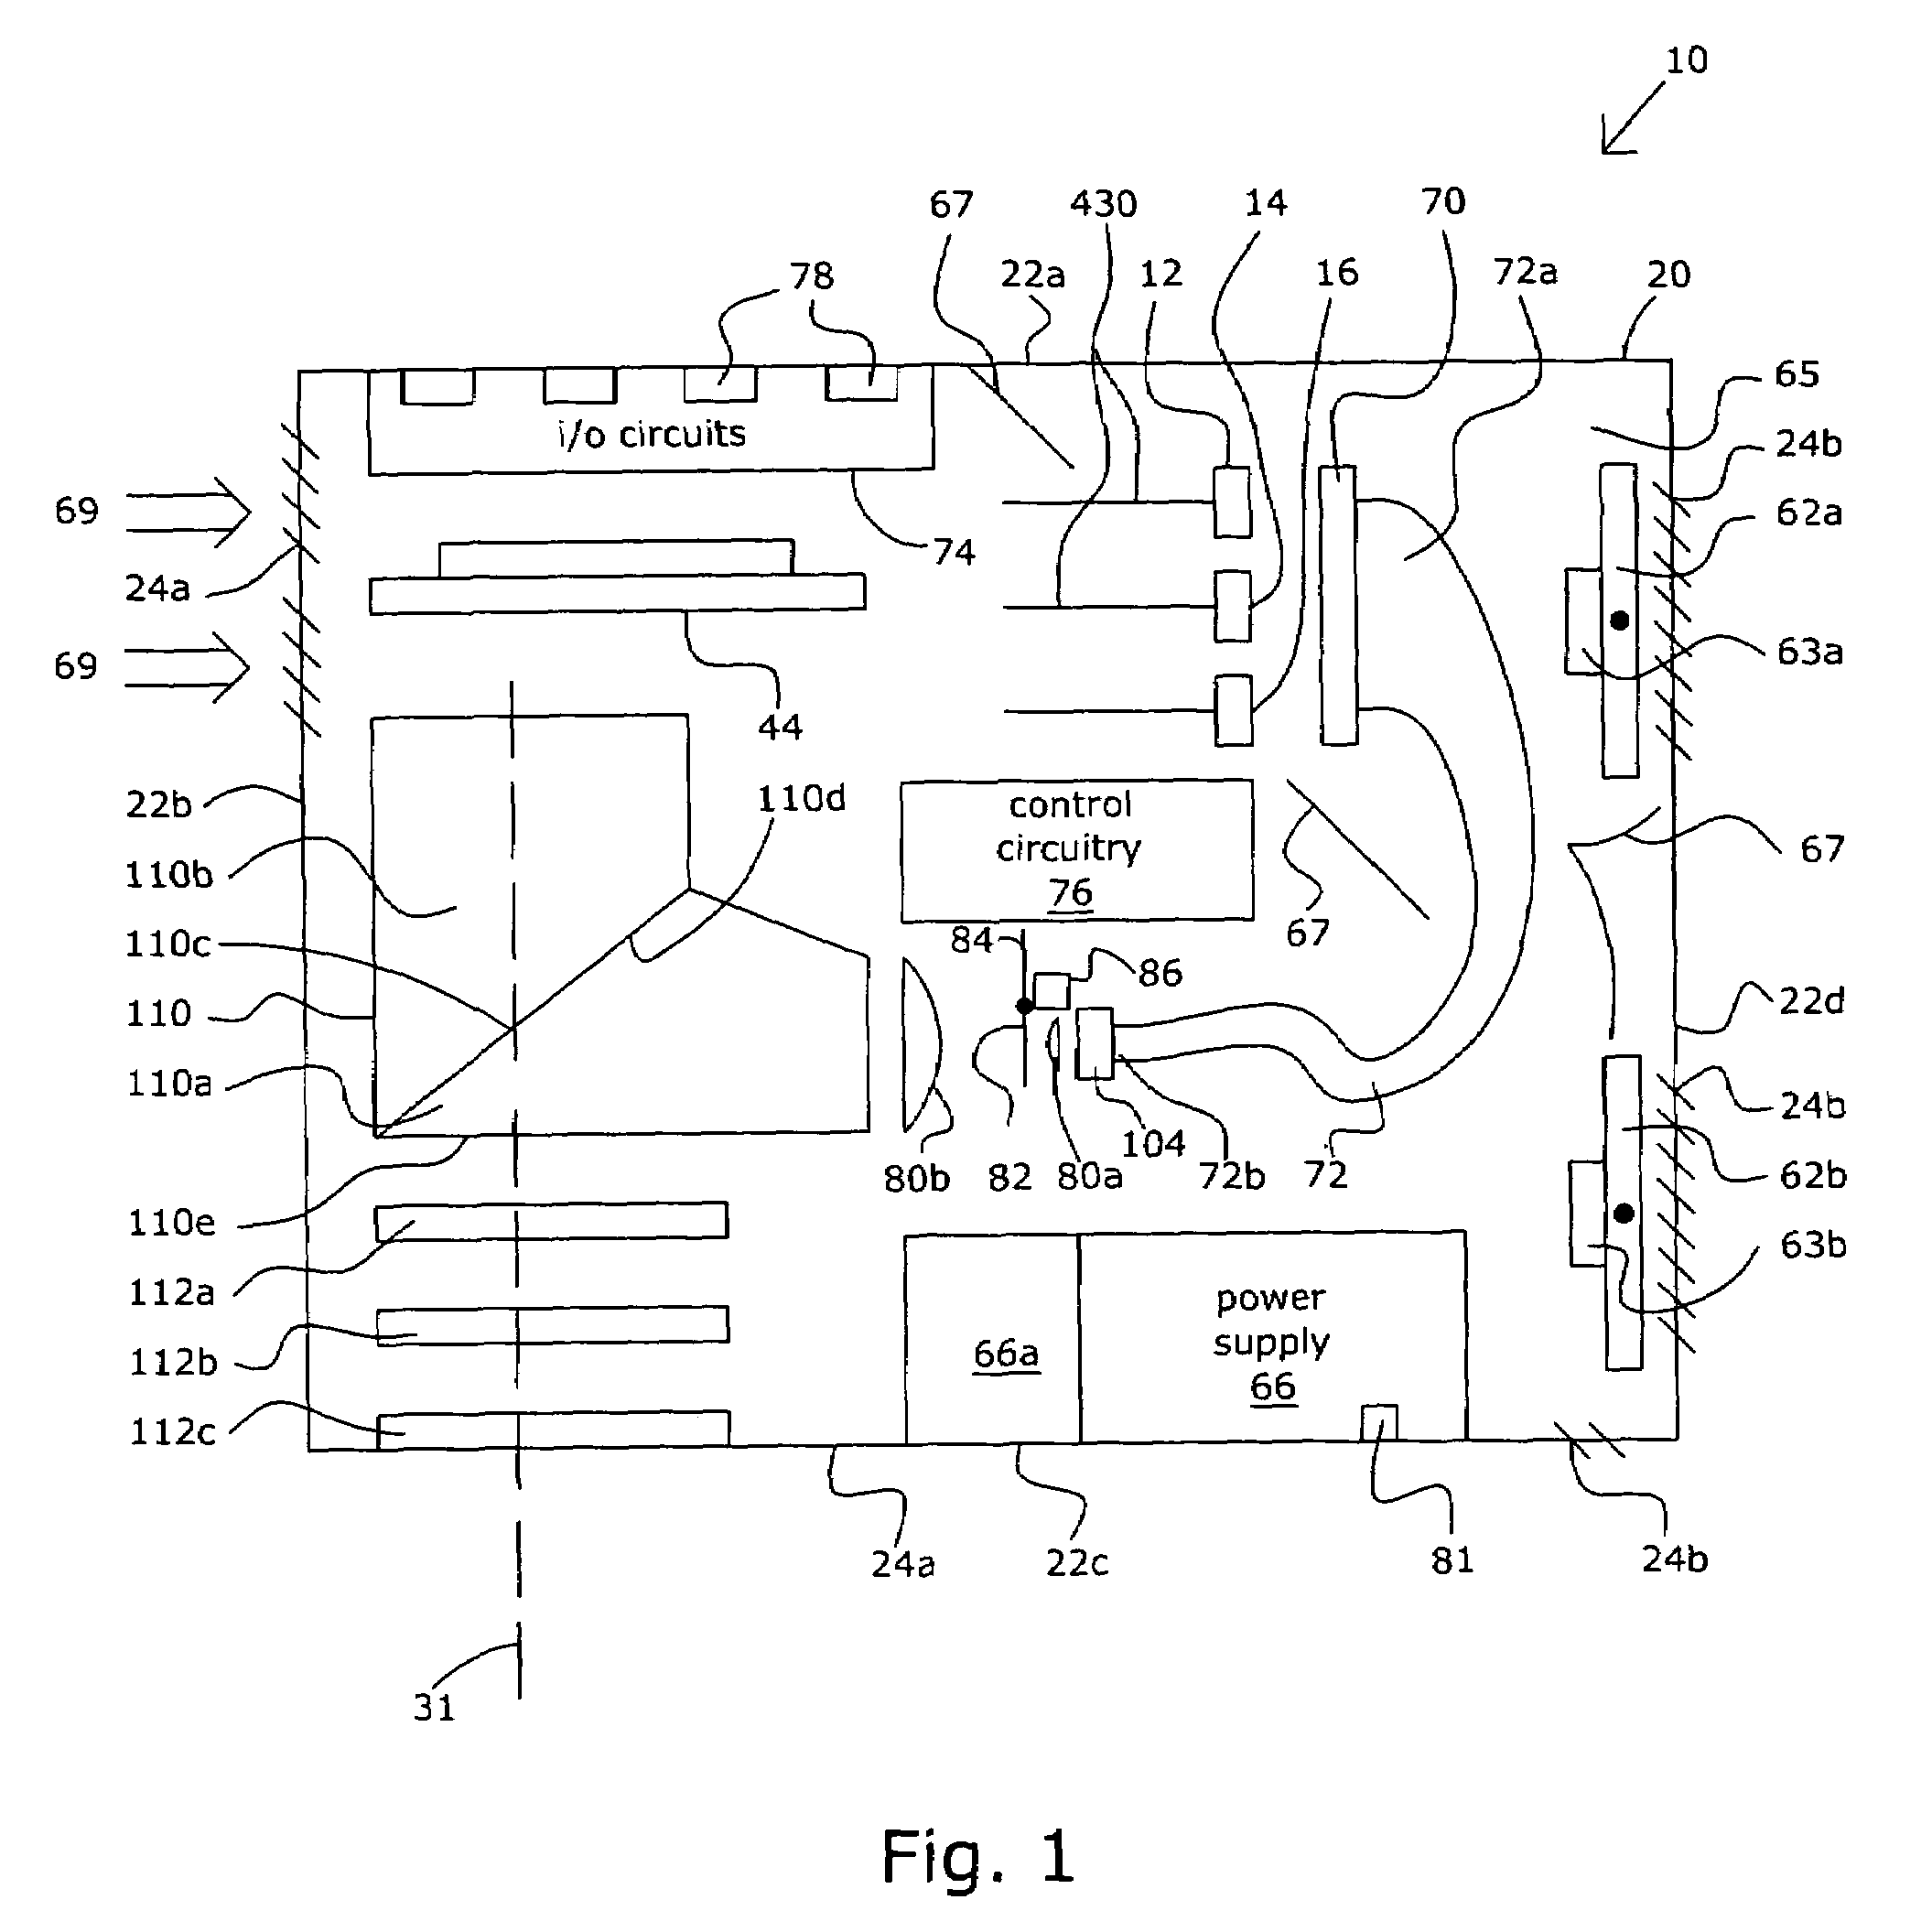 Projection-type display devices with reduced weight and size